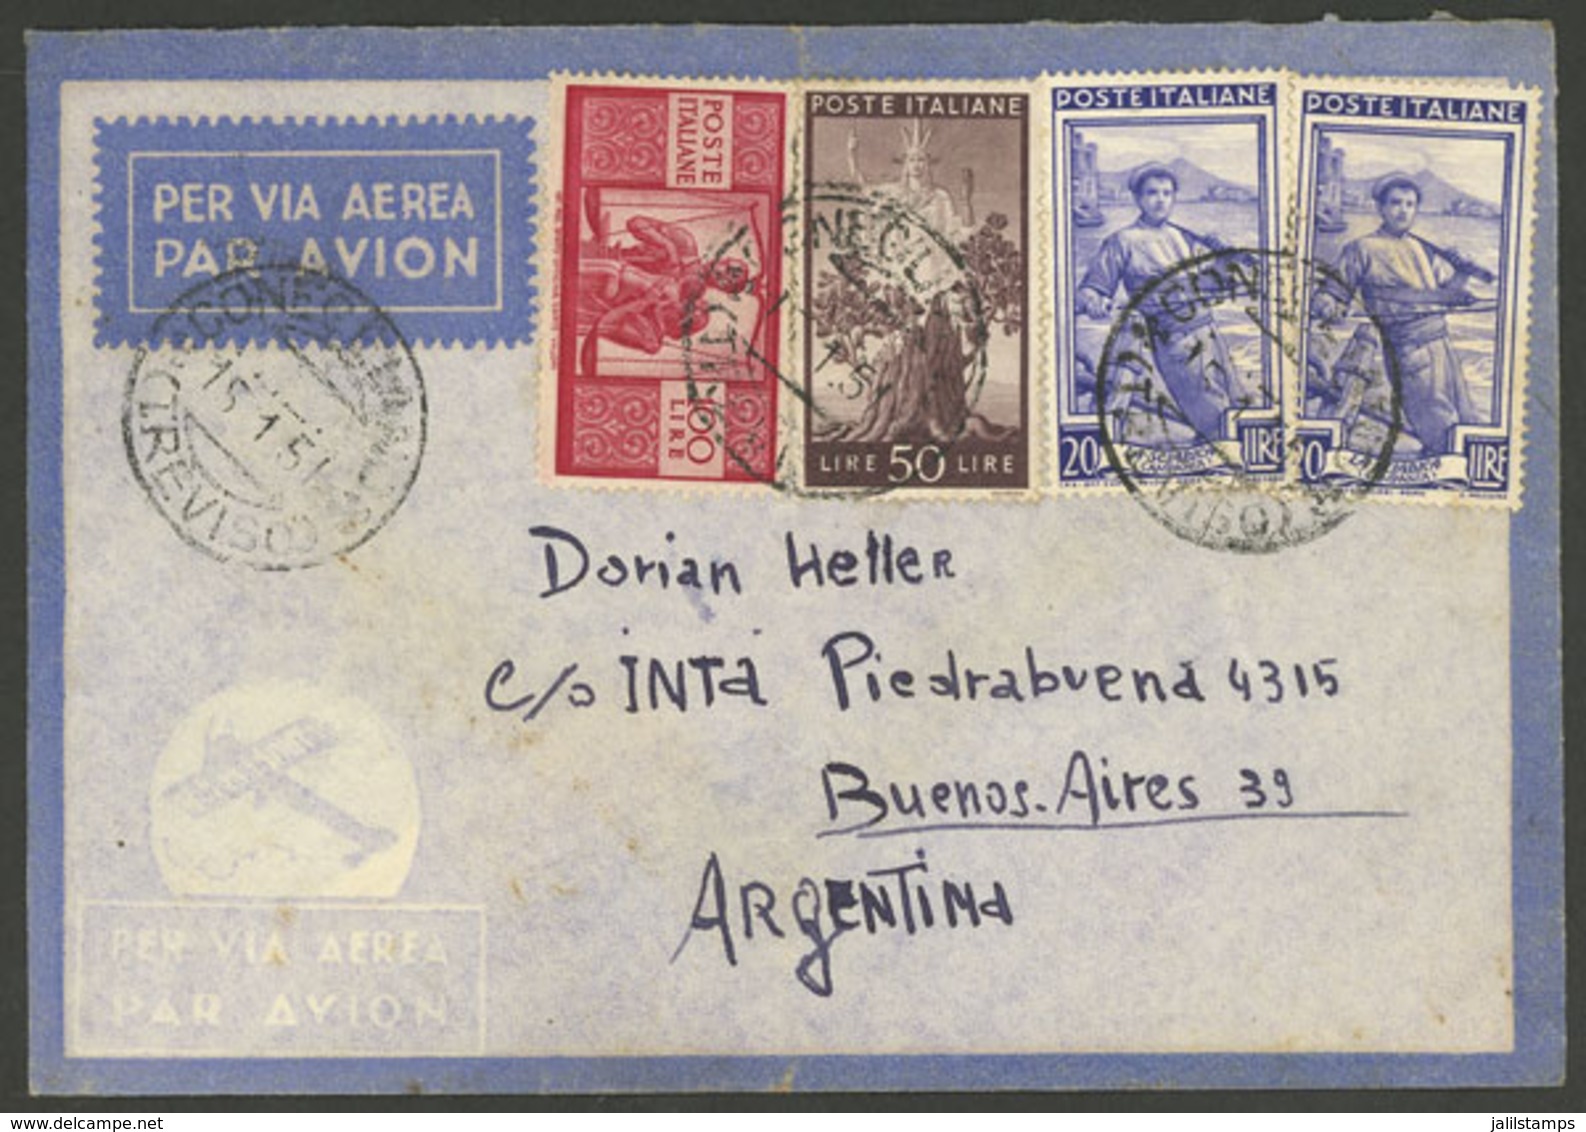 ITALY: 15/JA/1951 Conegiuno - Argentina, Airmail Cover With Mixed Postage Democratica + Lavoro (total 190L.), Very Nice! - Non Classés